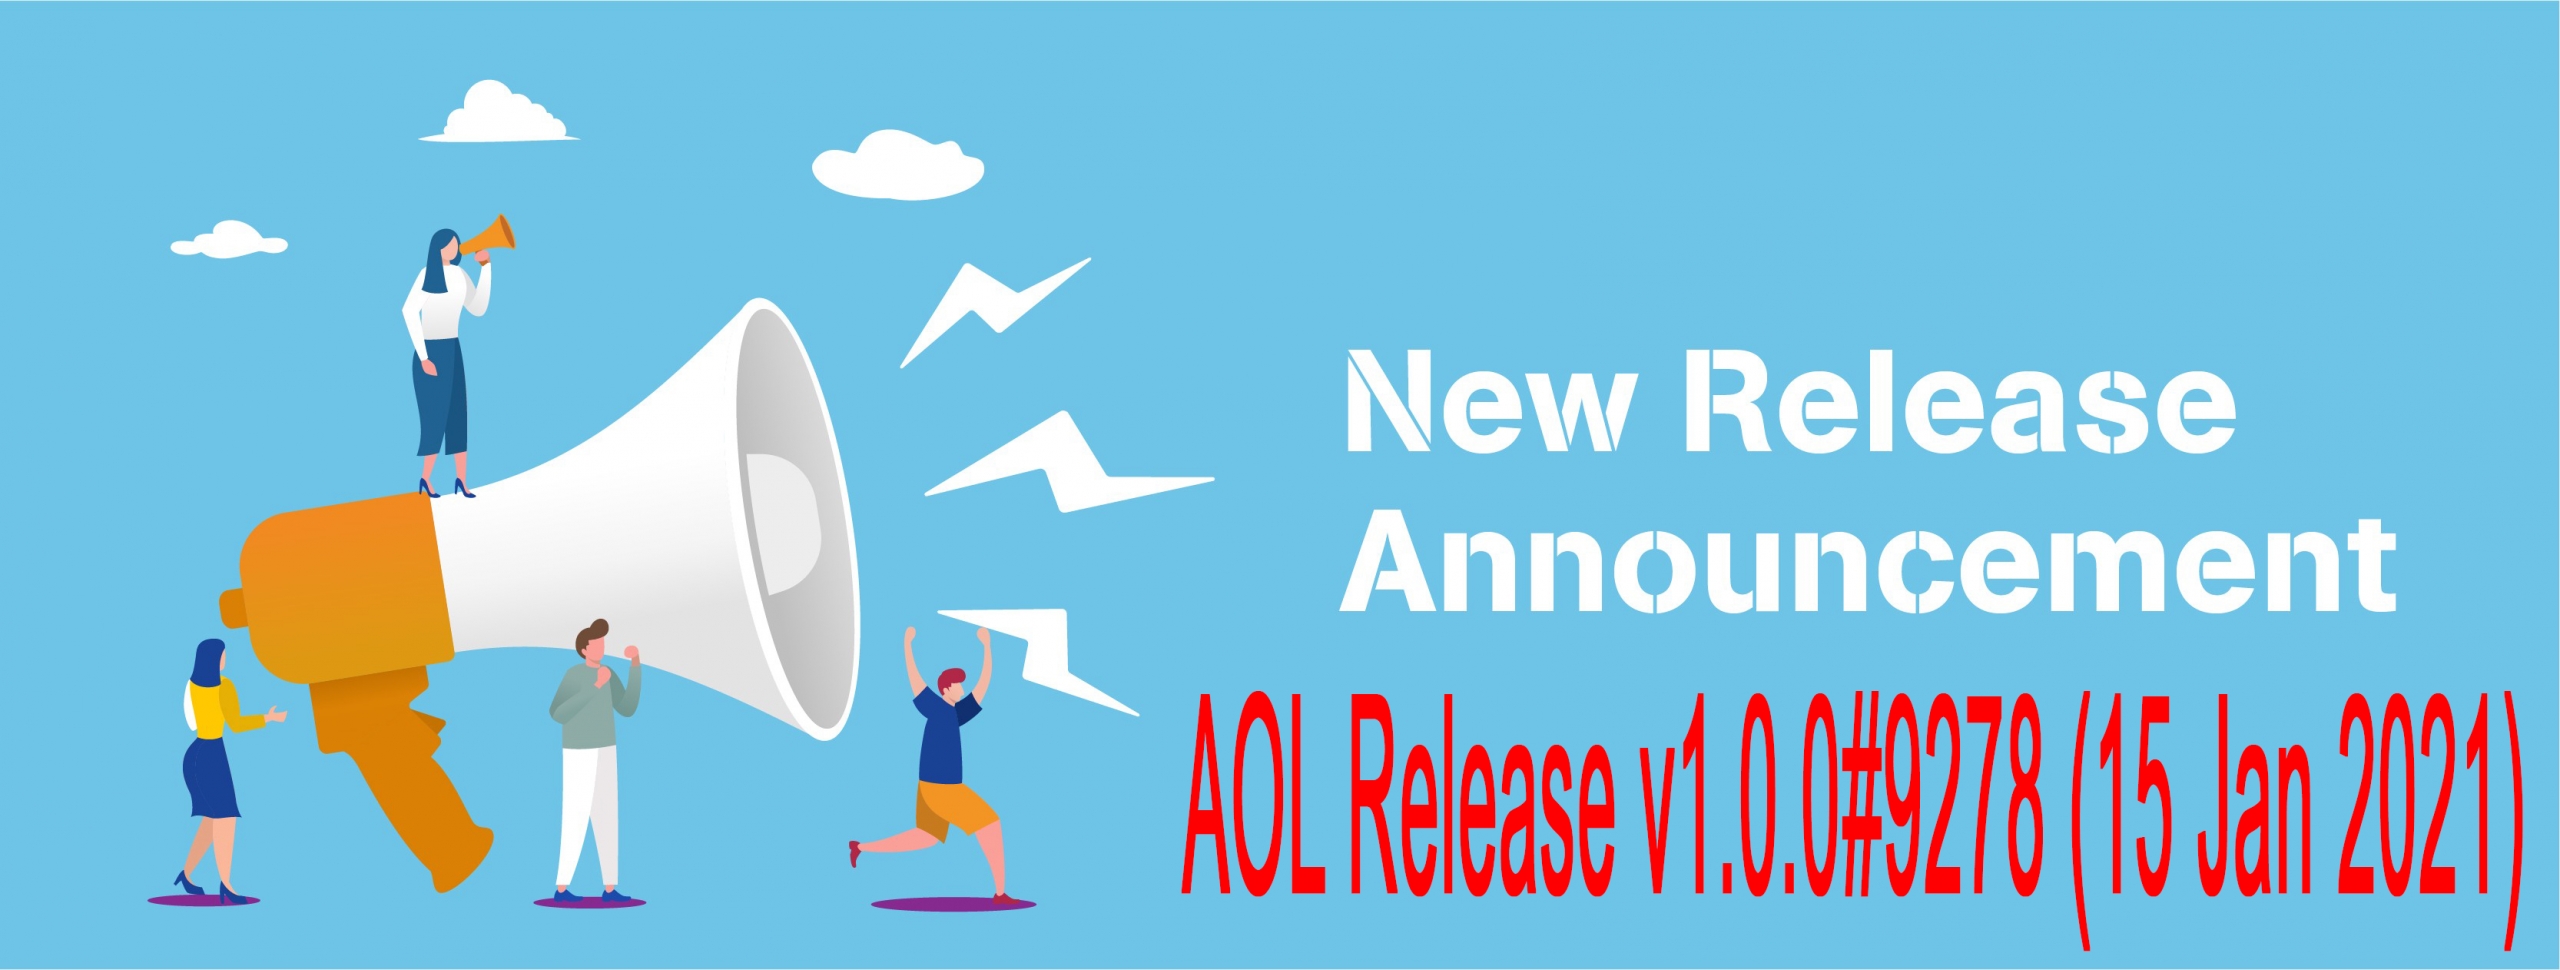 Accurate Online Release v1.0.0#9278 (15 Jan 2021)